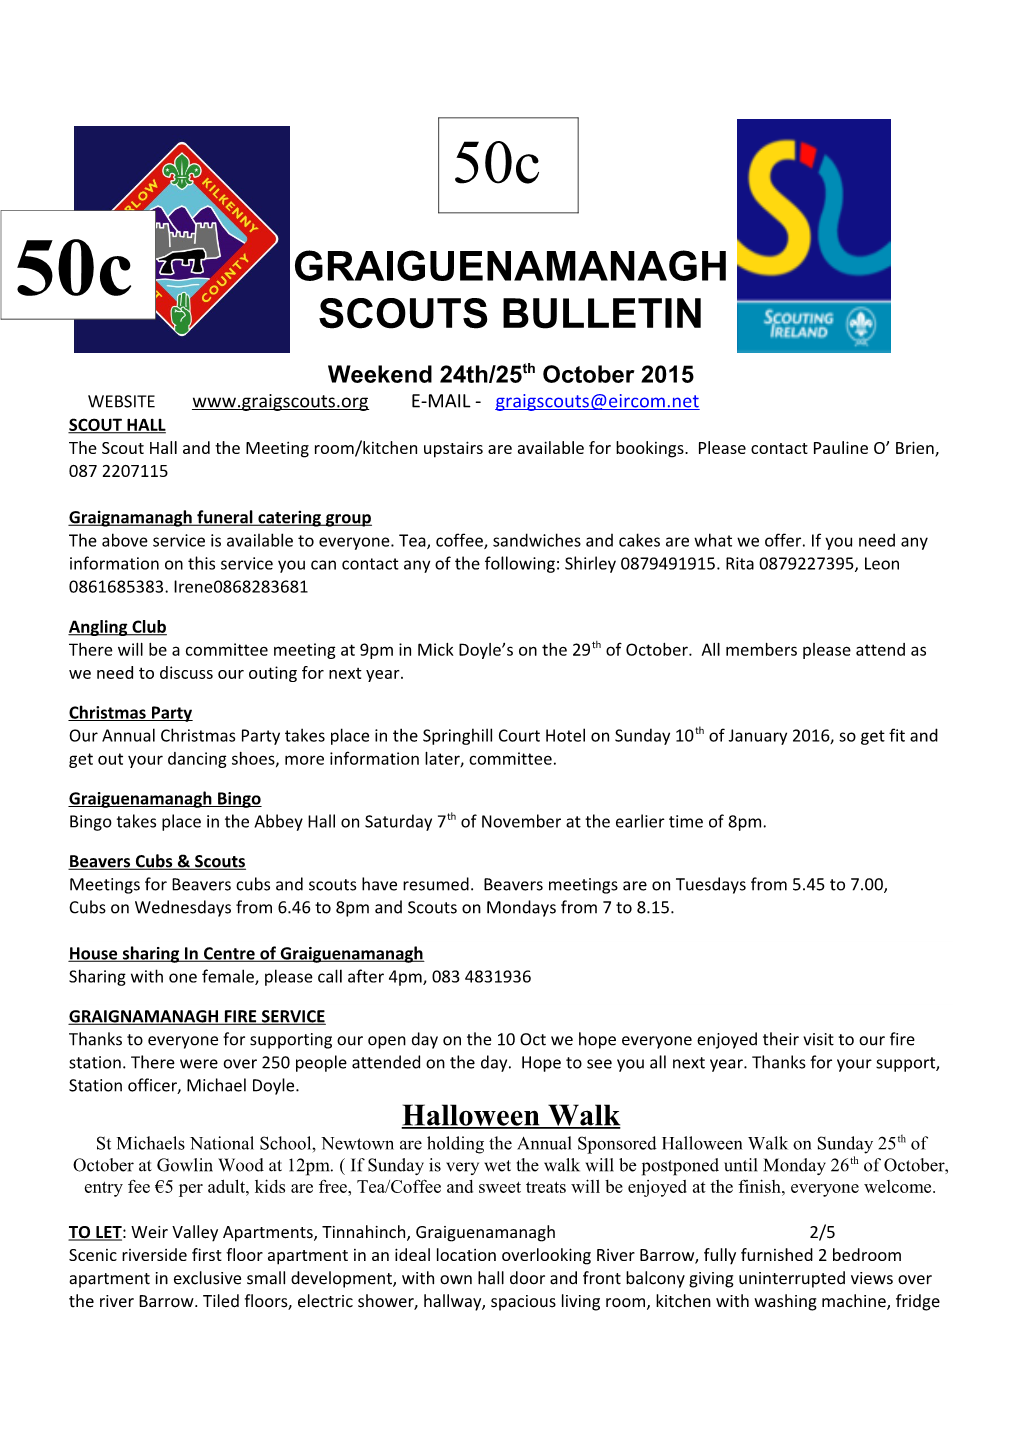 Graignamanagh Funeral Catering Group